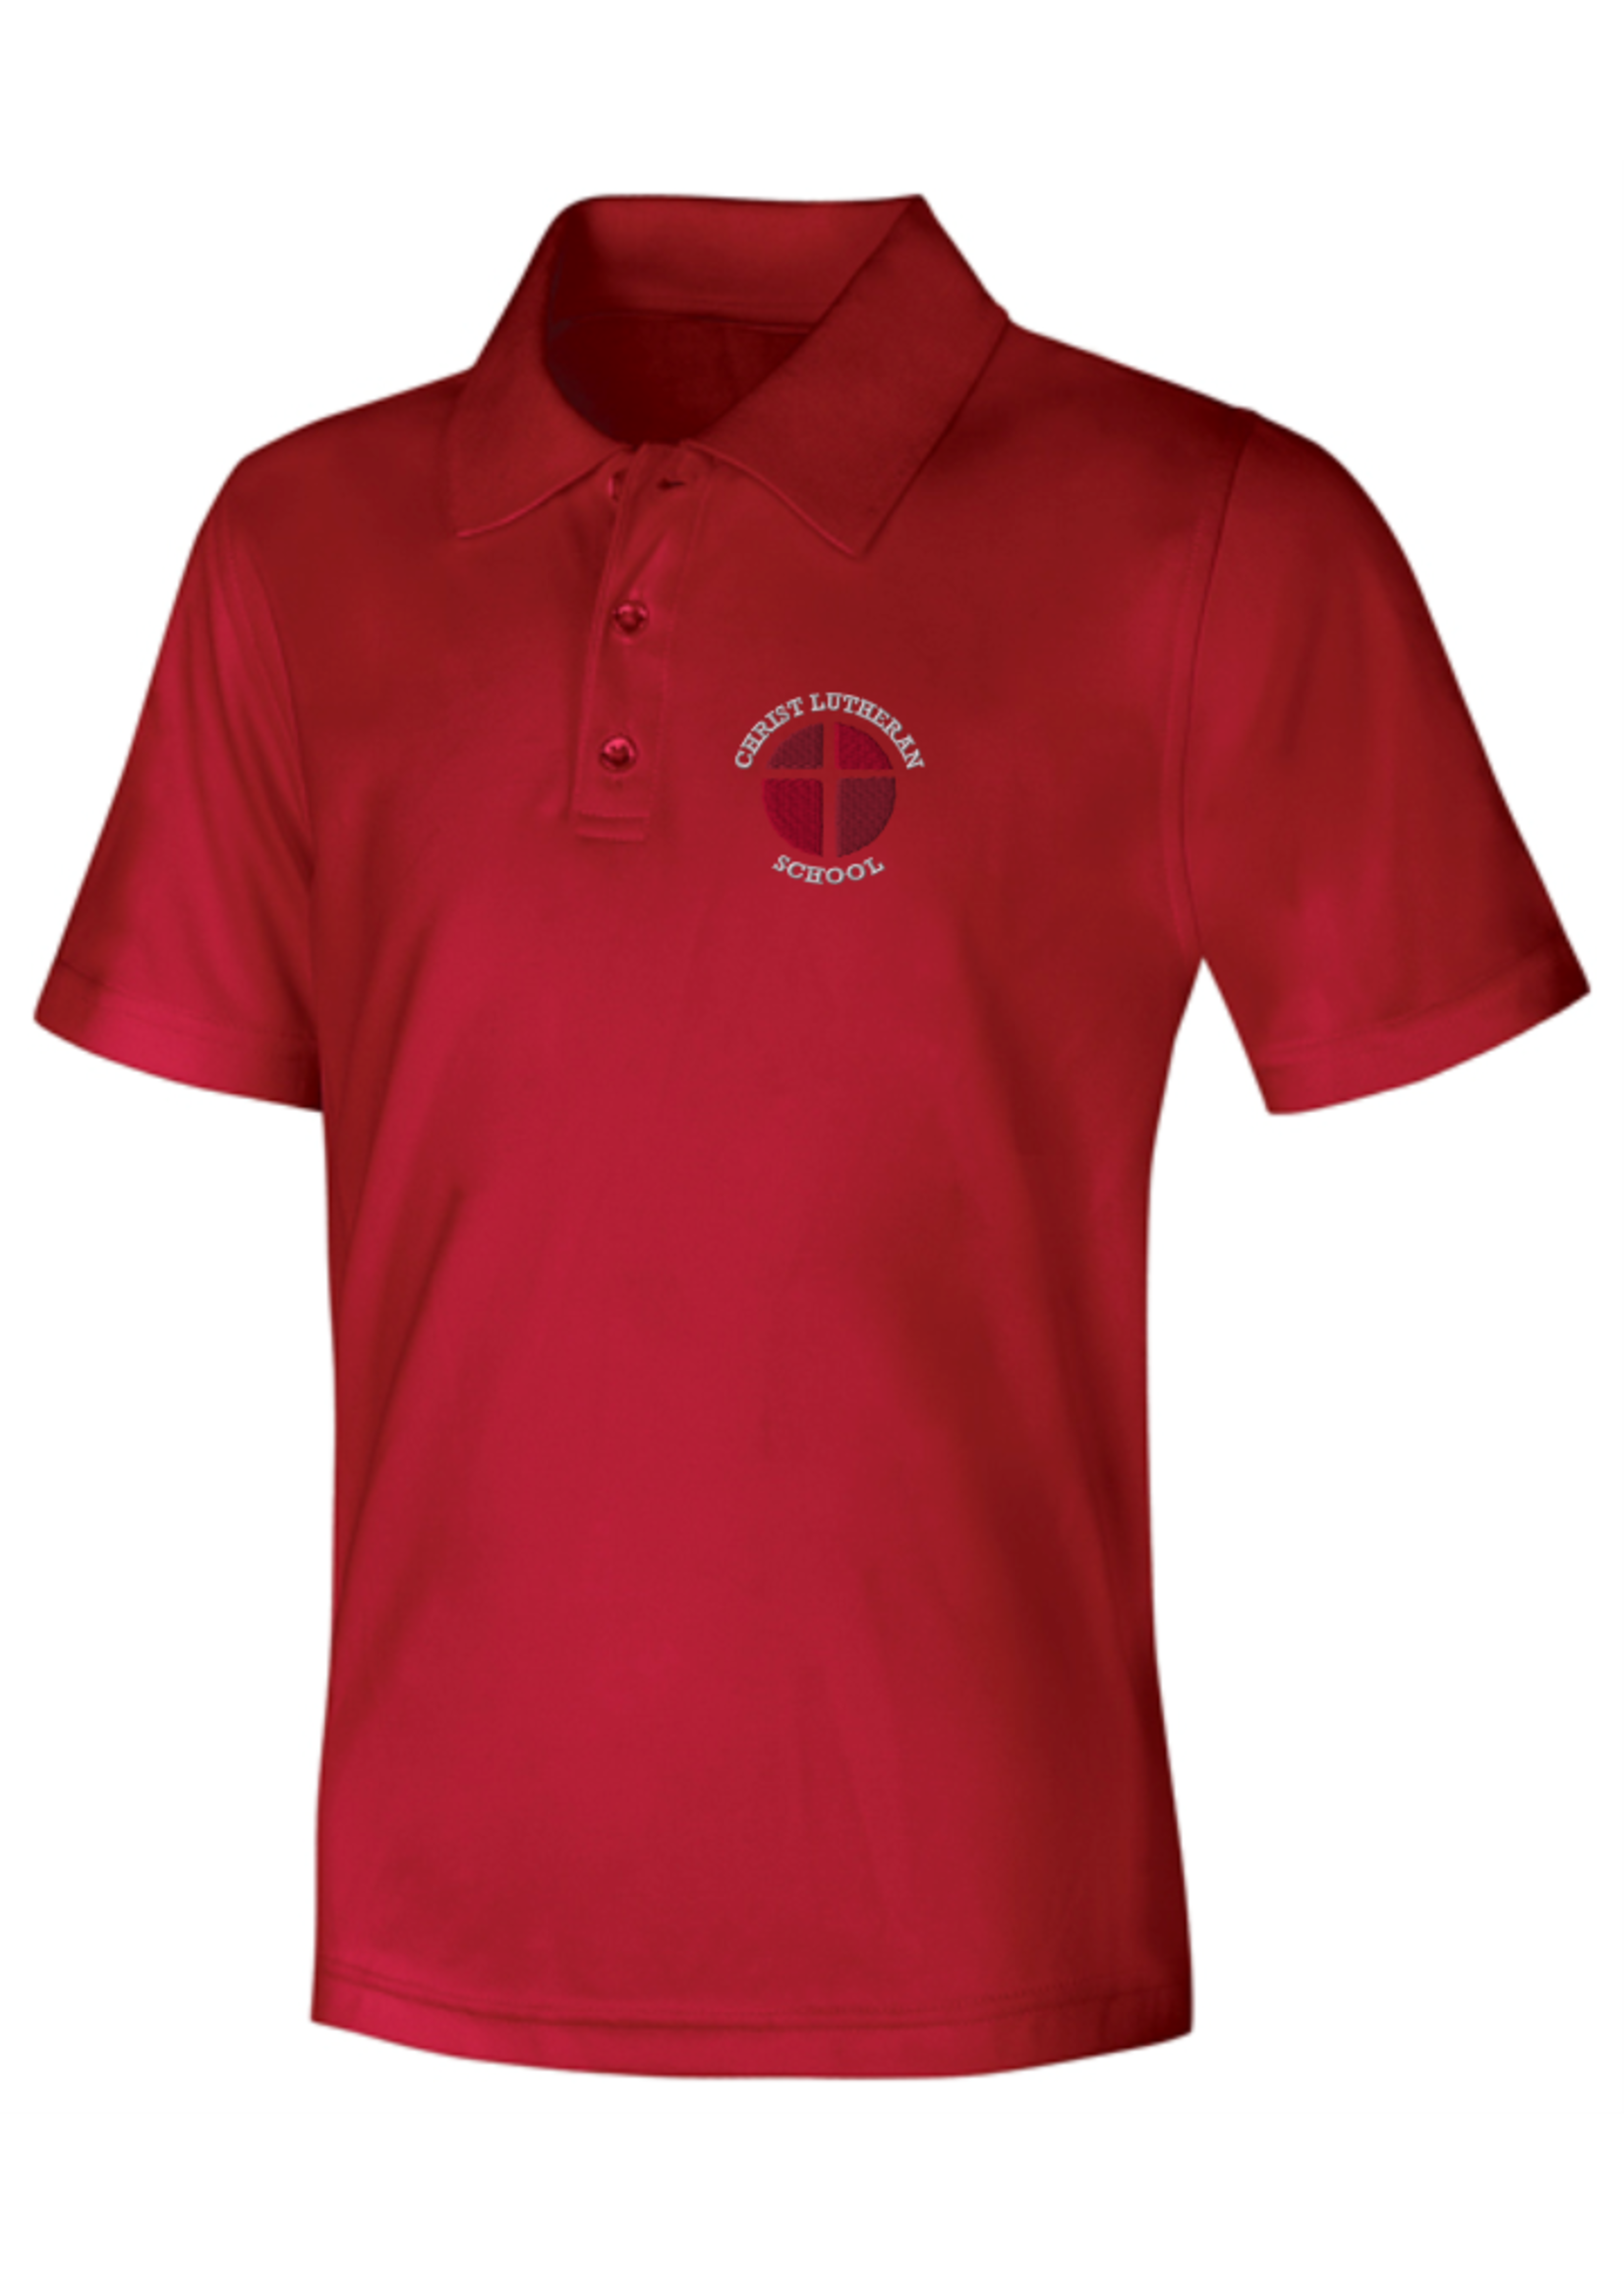 CLS Red DryFit Short Sleeve Polo Shirt